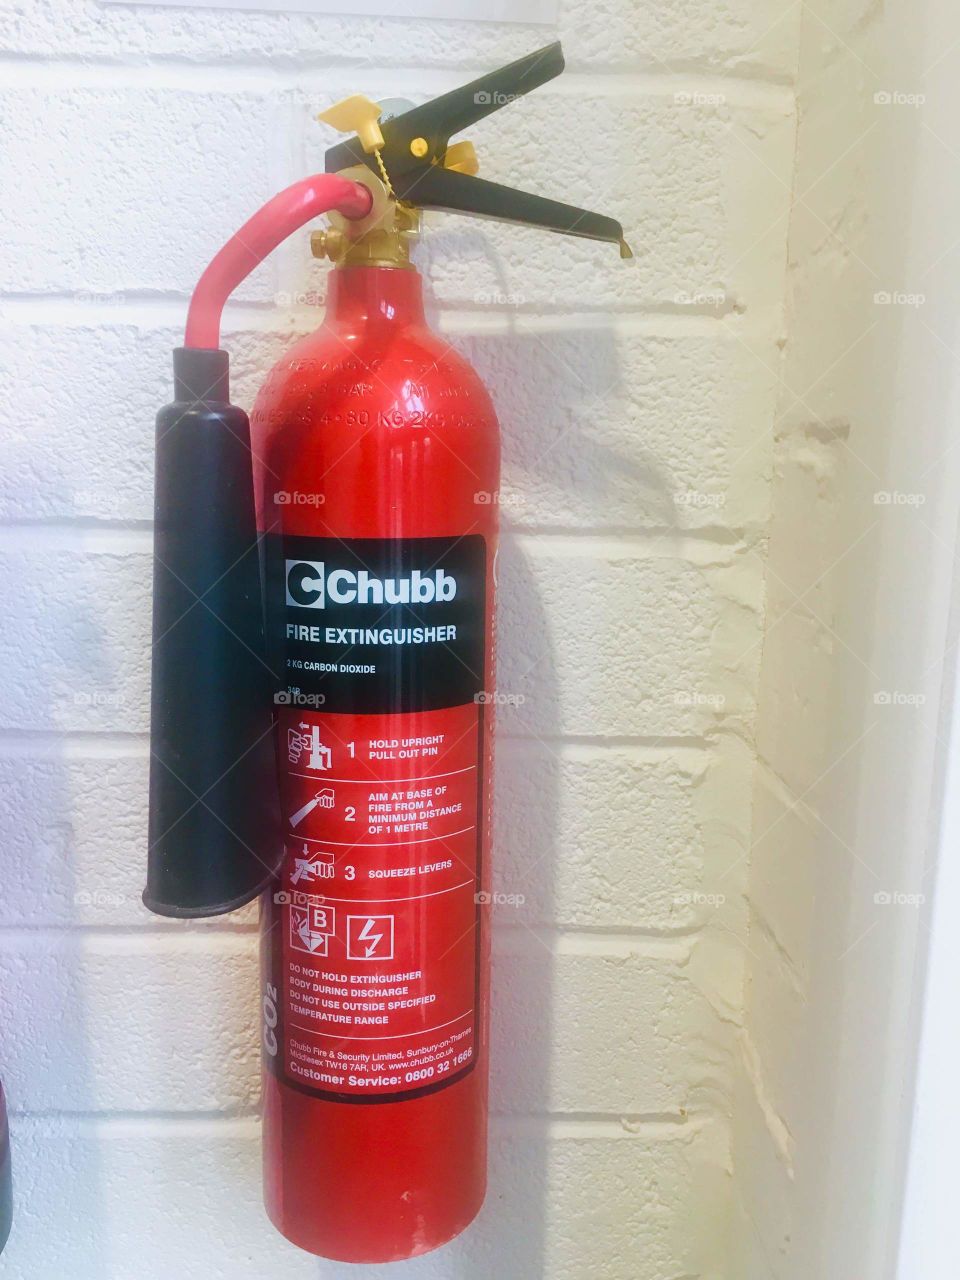 Chubb’s red fire extinguisher on wall